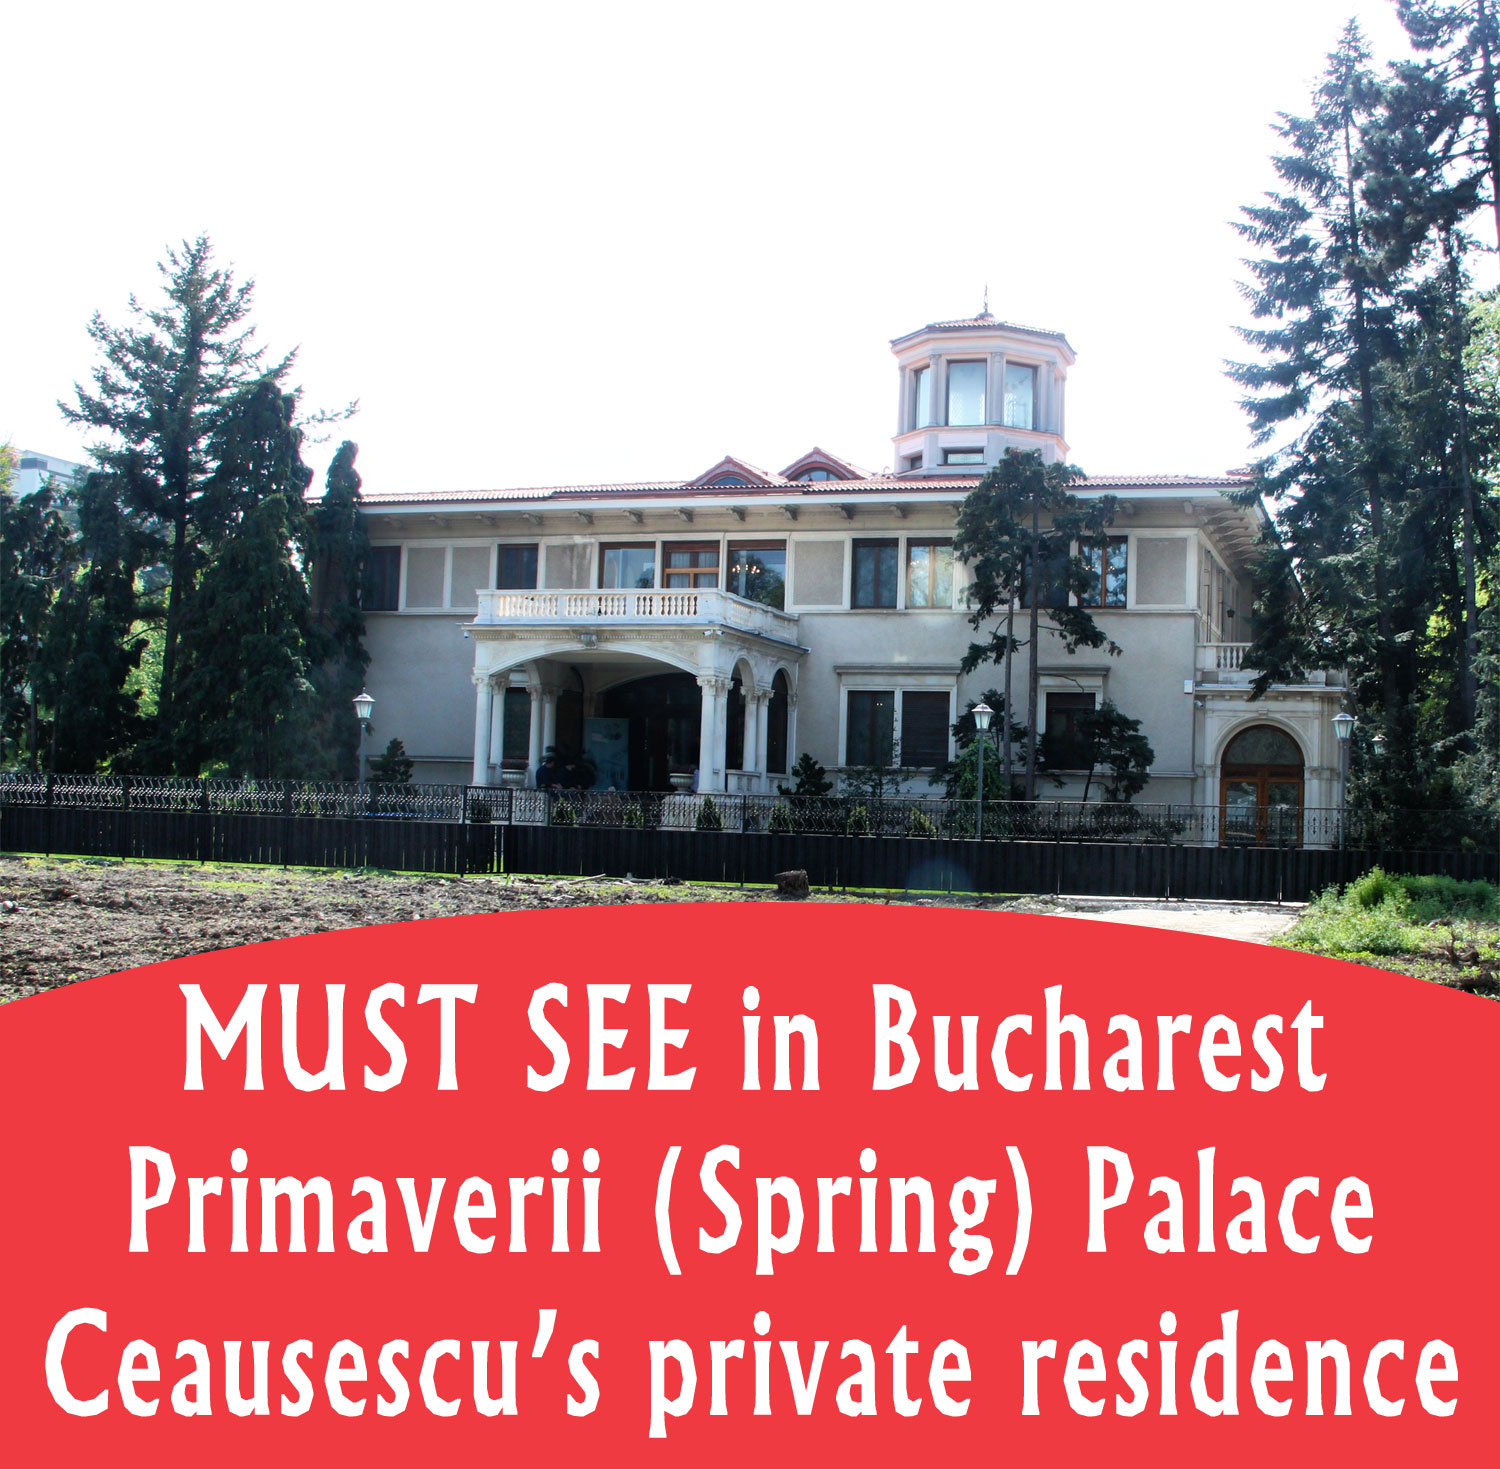 A new MUST SEE landmark in Bucharest: Primaverii (Spring) Palace, Ceausescu’s private residence